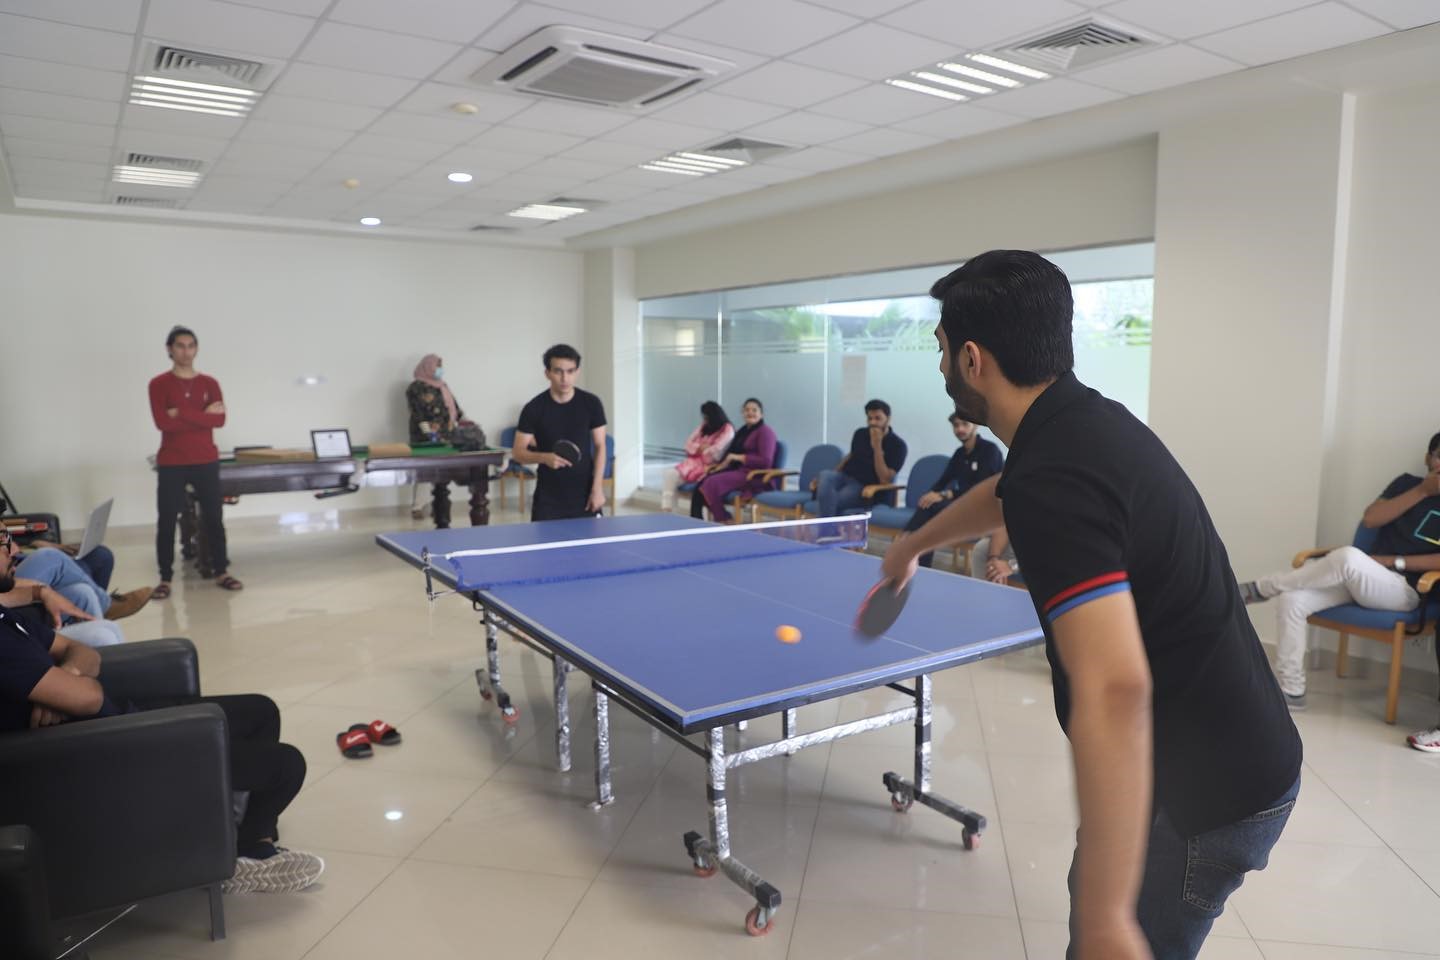 Sports and Adventure Club hosts a Table Tennis Tournament in collaboration with Nelson Paints (Pvt.) Ltd.